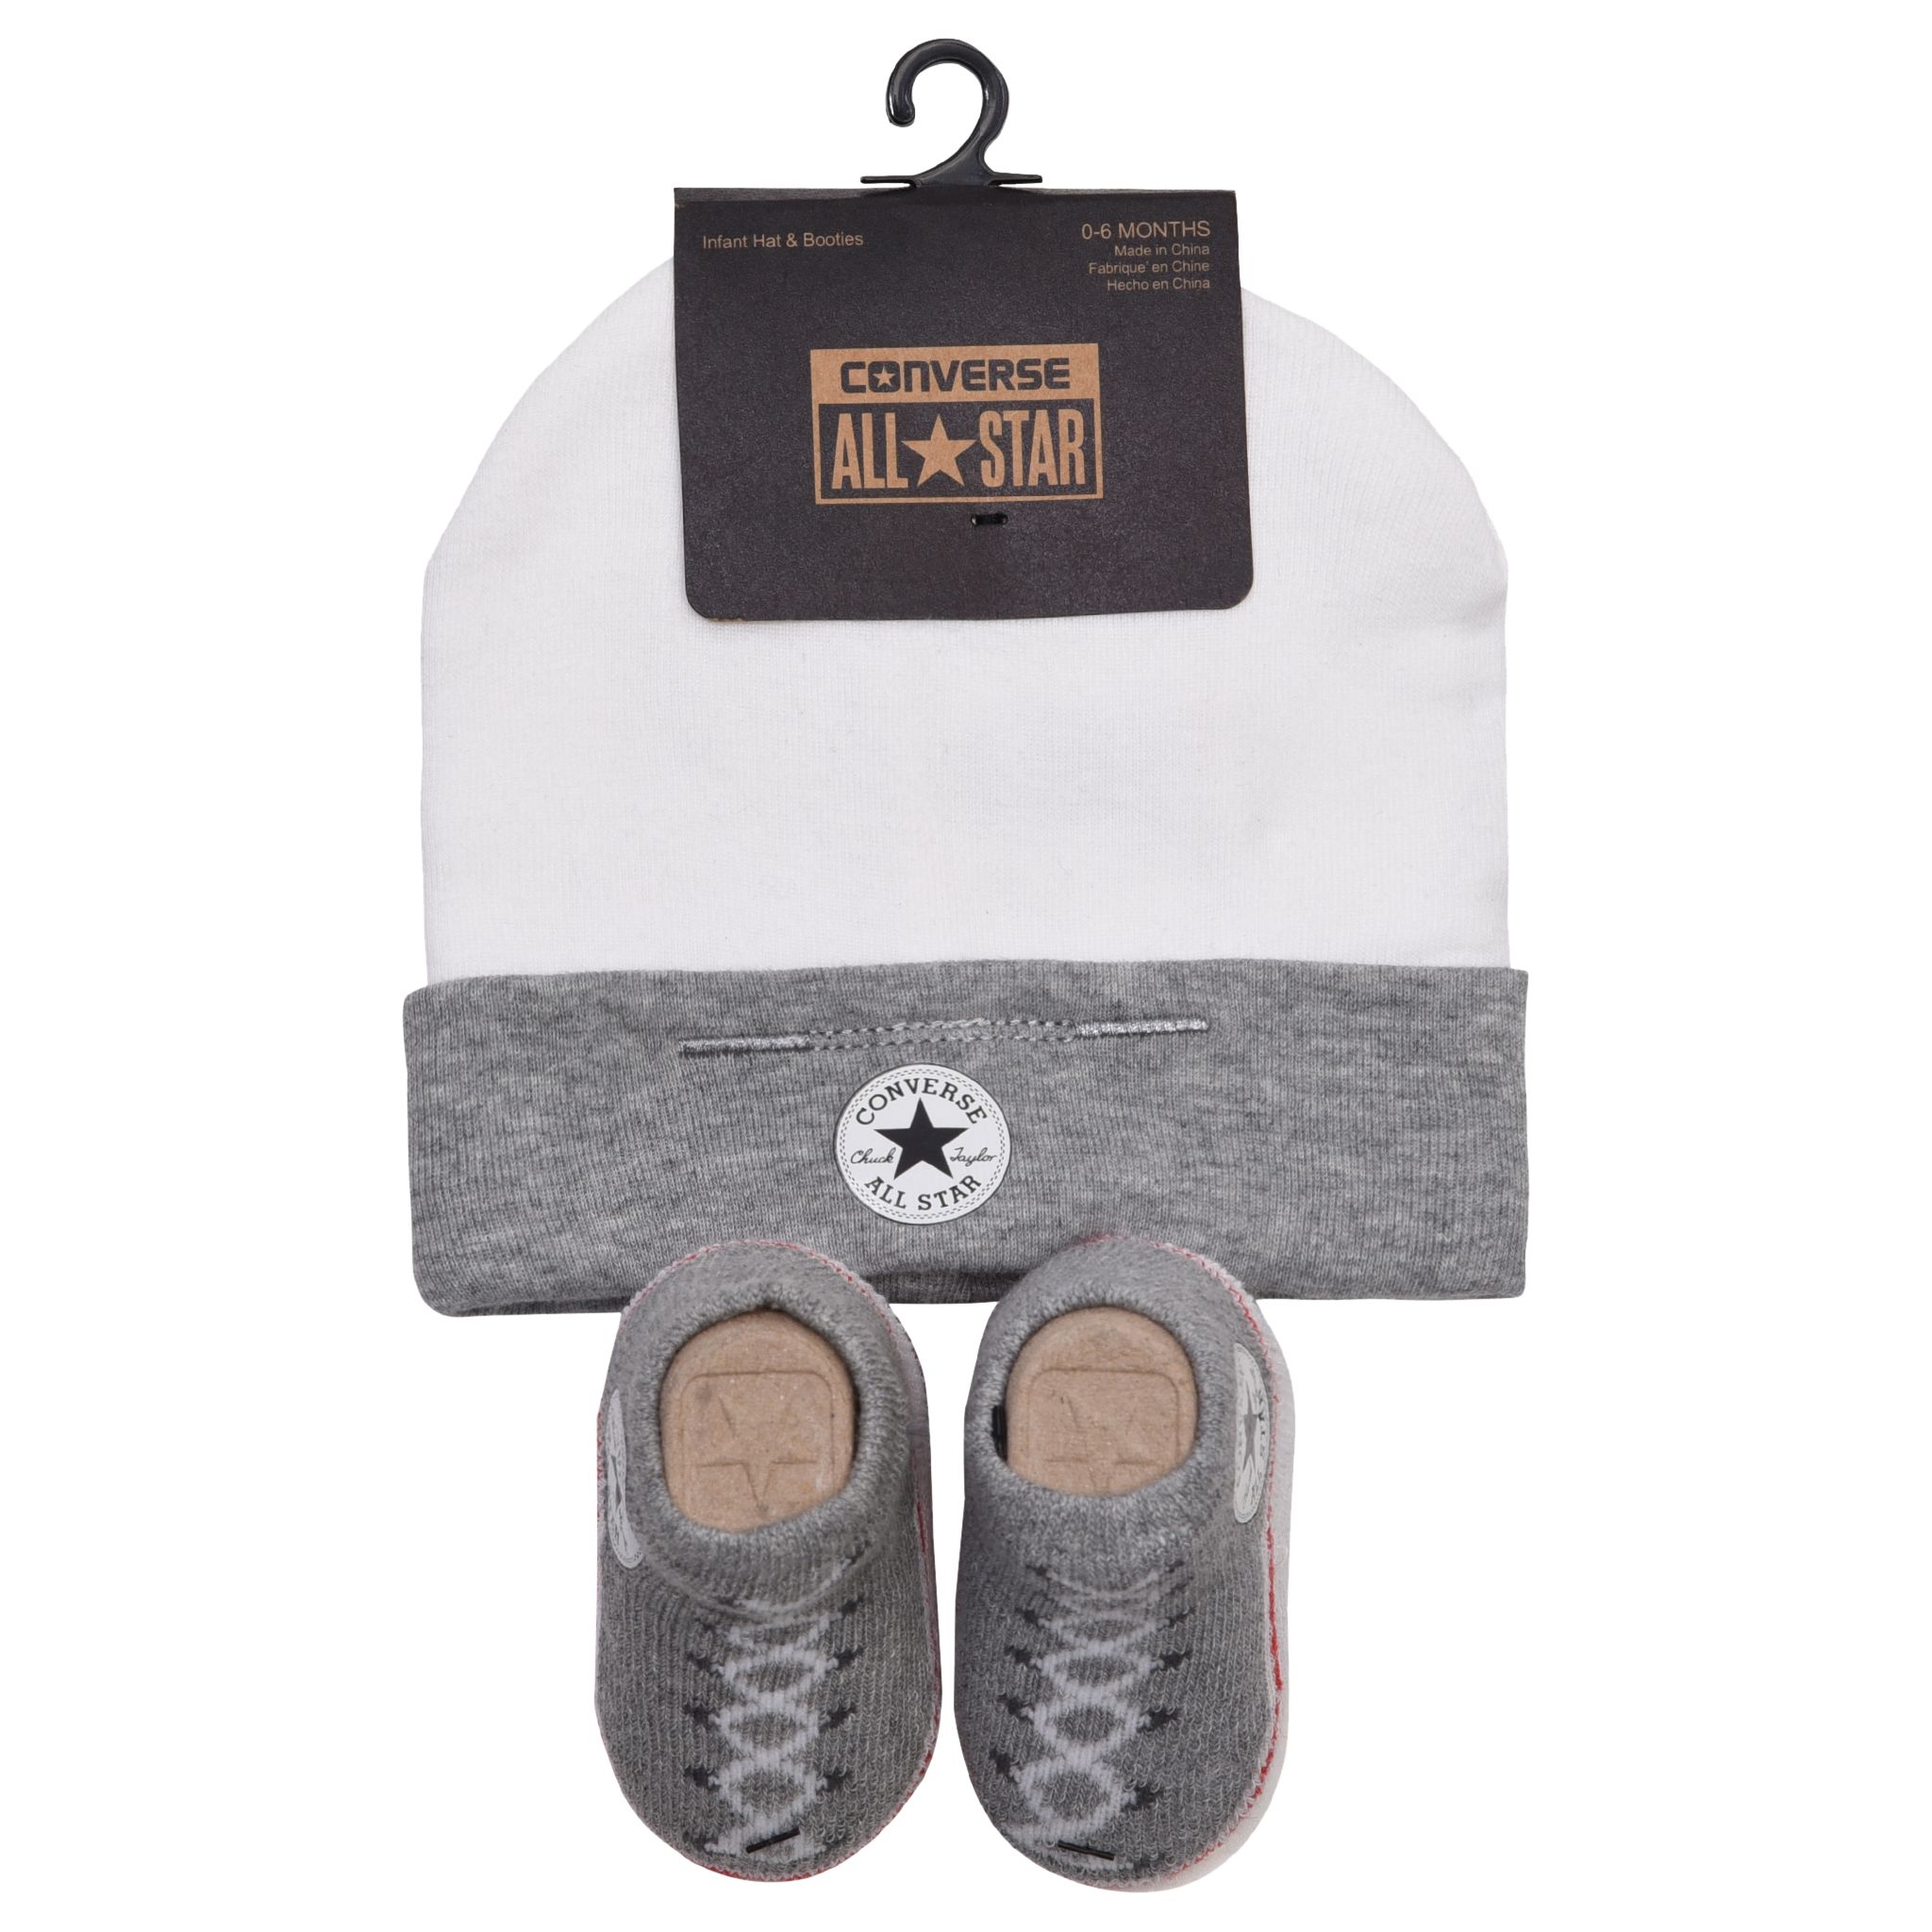 converse infant hat and booties